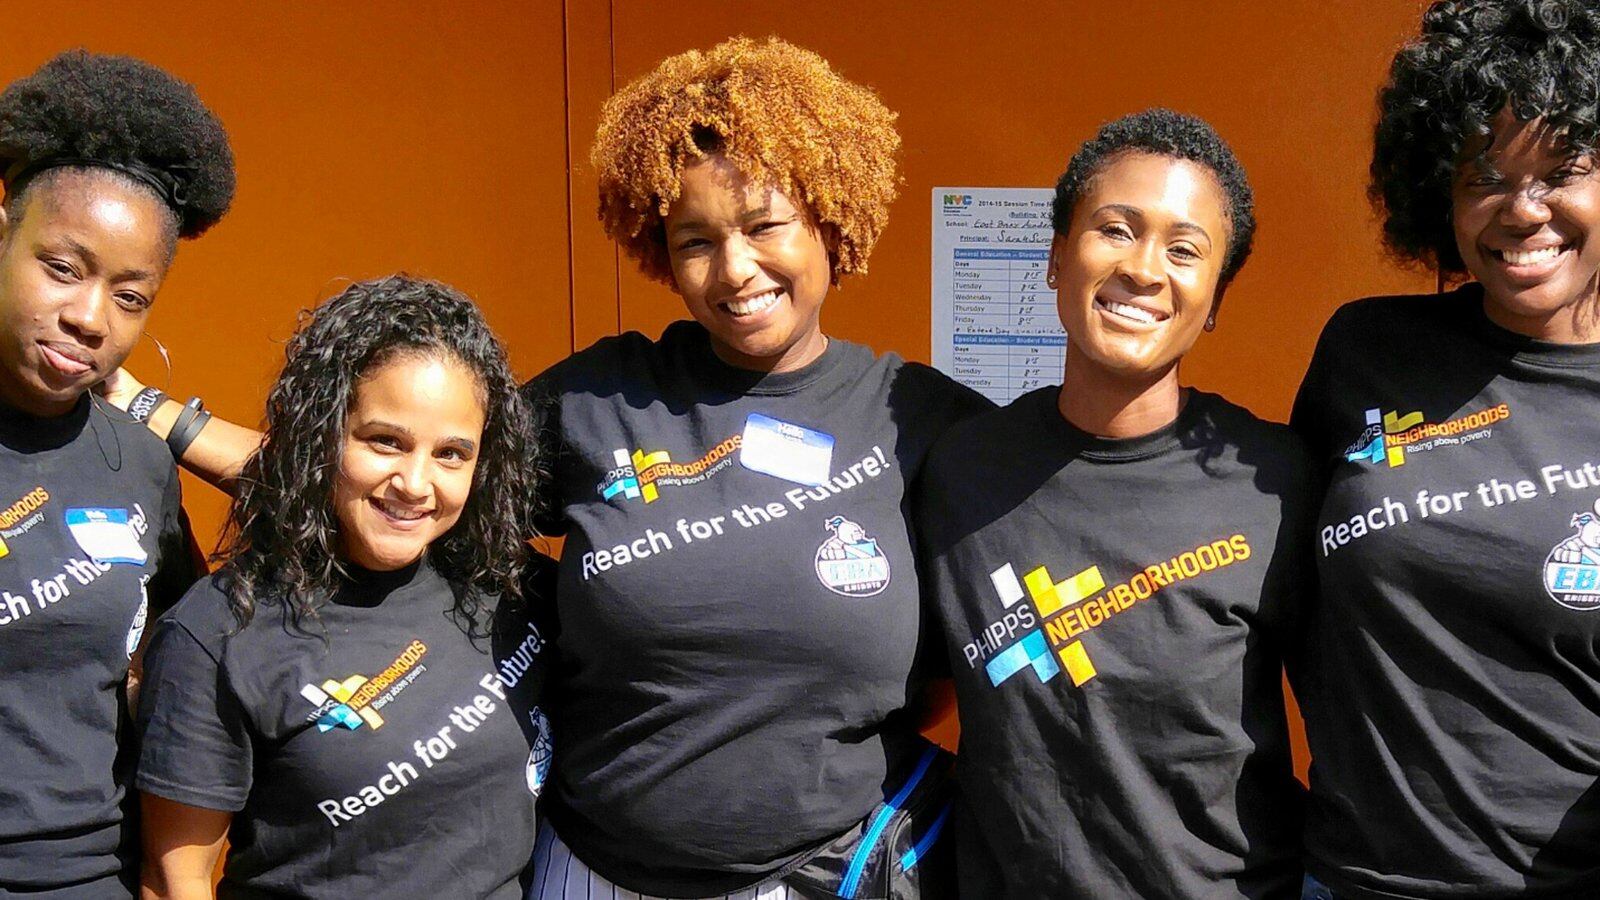 Perquida Payne (center) with colleagues. Payne is the community school director at the East Bronx Academy of the Future.